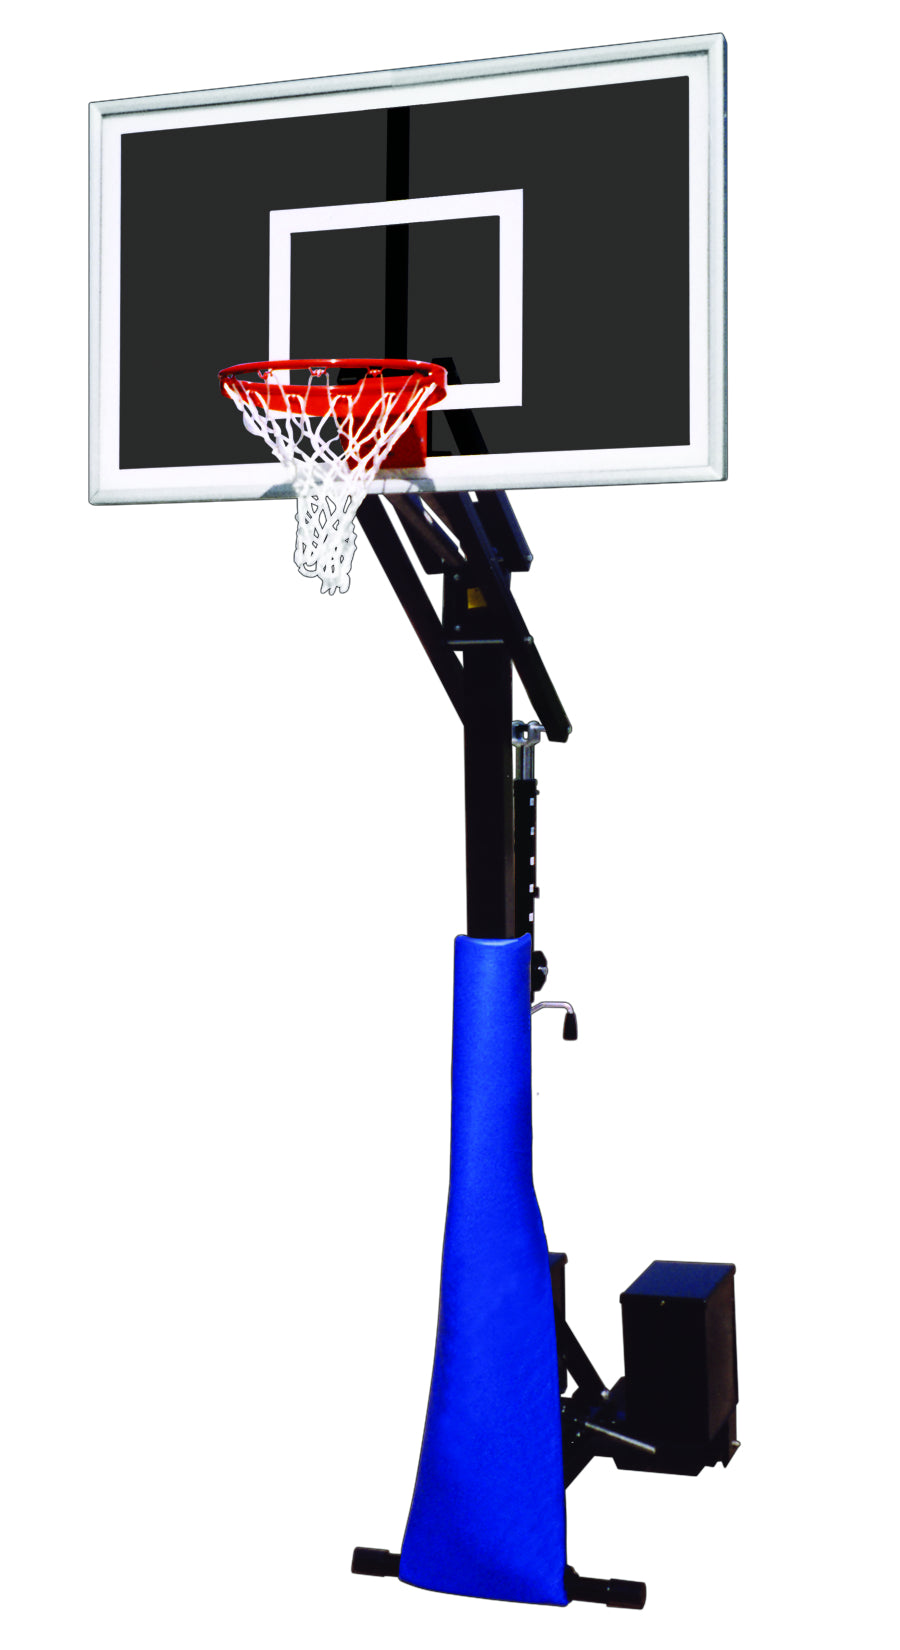 First Team RollaJam Eclipse Portable Basketball Goal - 36"x60" Smoked Tempered Glass